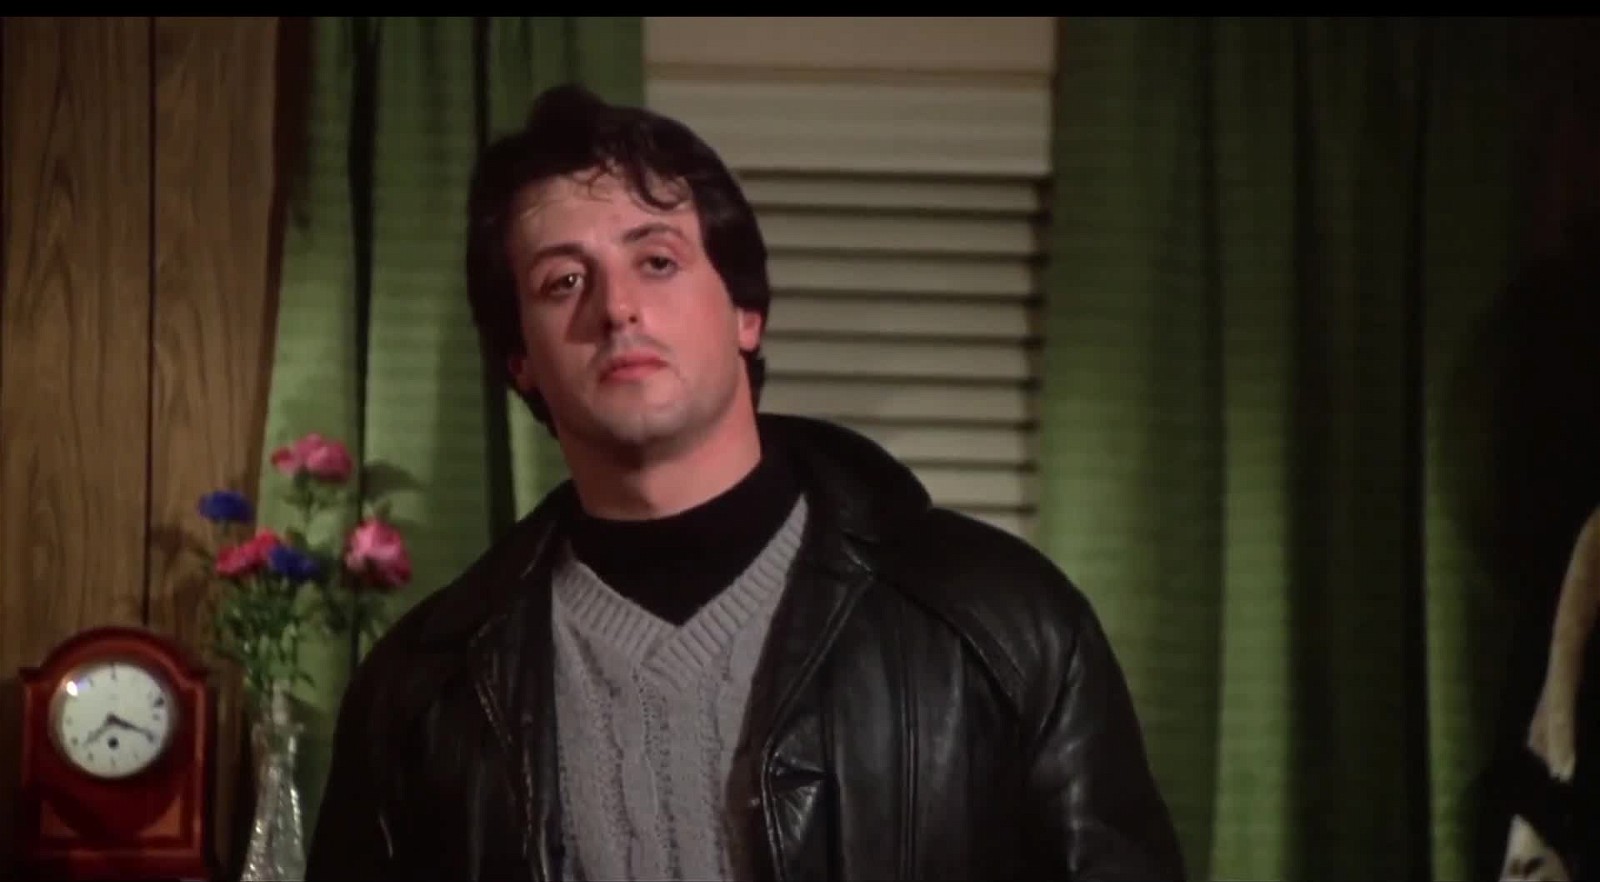 Sylvester Stallone's Rocky films made him a household name